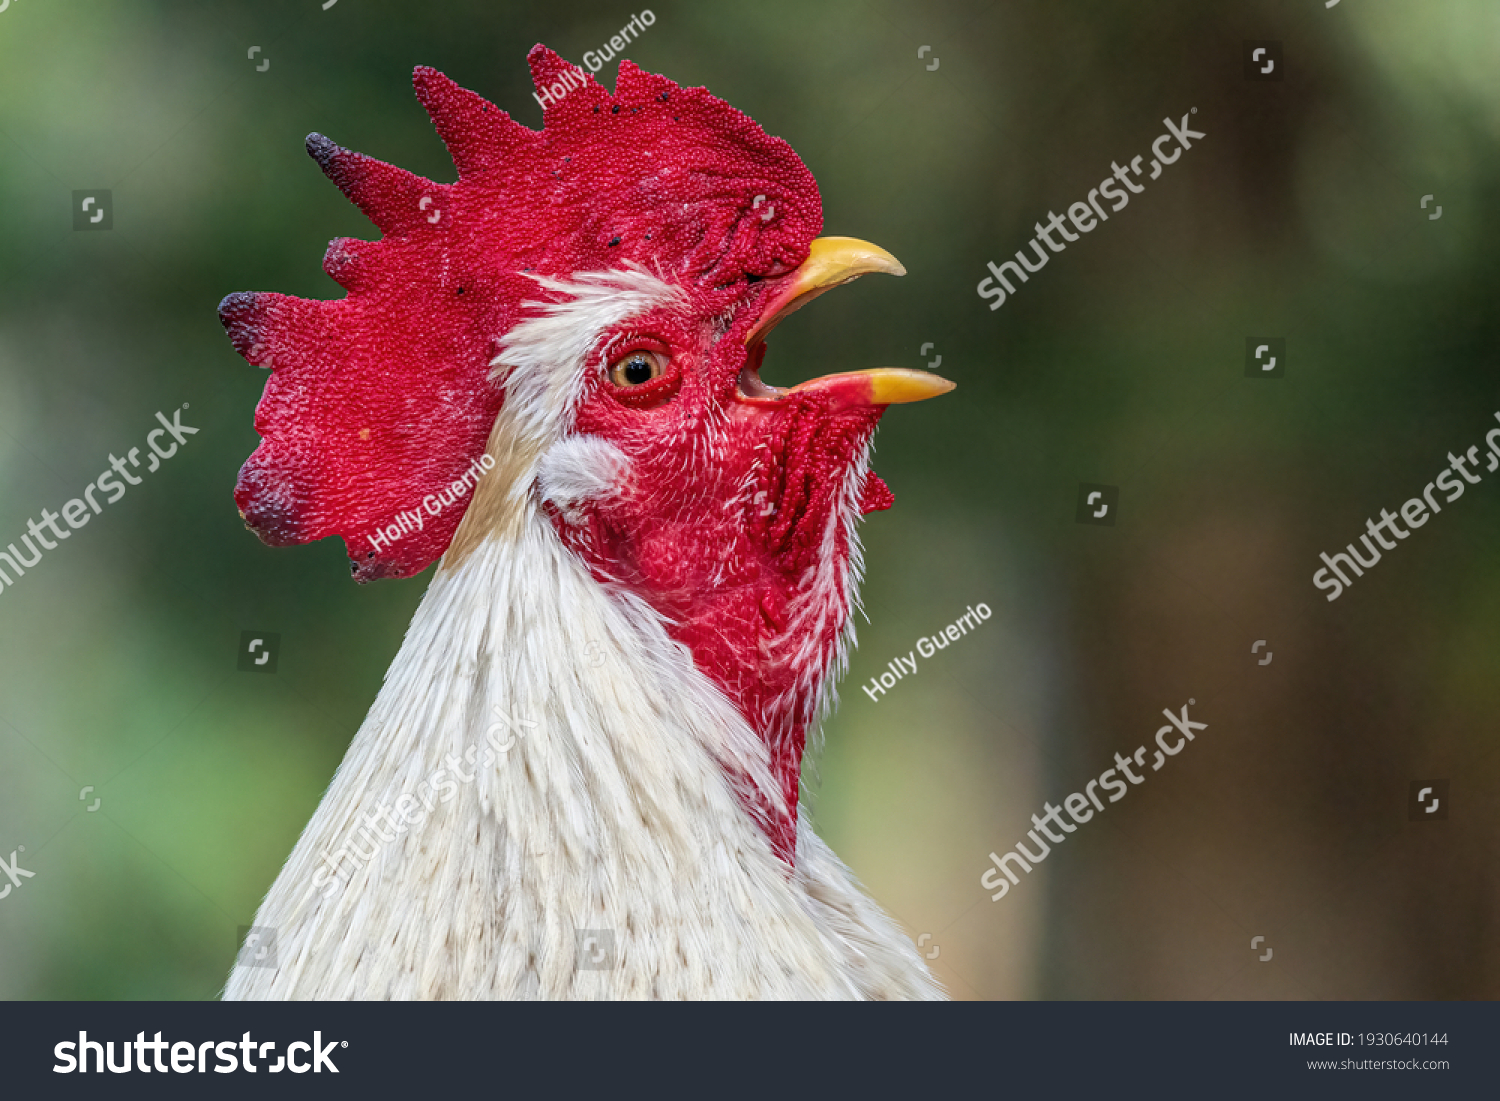 Closeup White Rooster Crowing Gallus Gallus Stock Photo Edit Now